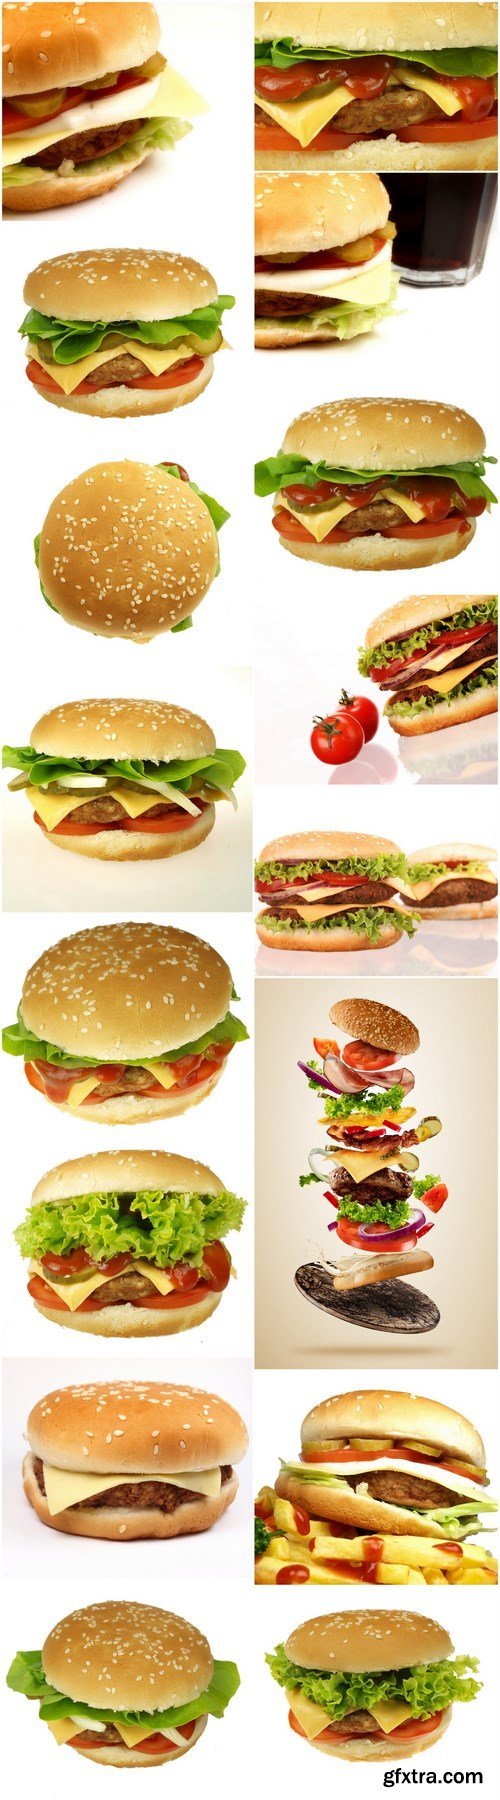 Delicious burgers isolated on white background - 16xHQ JPEG